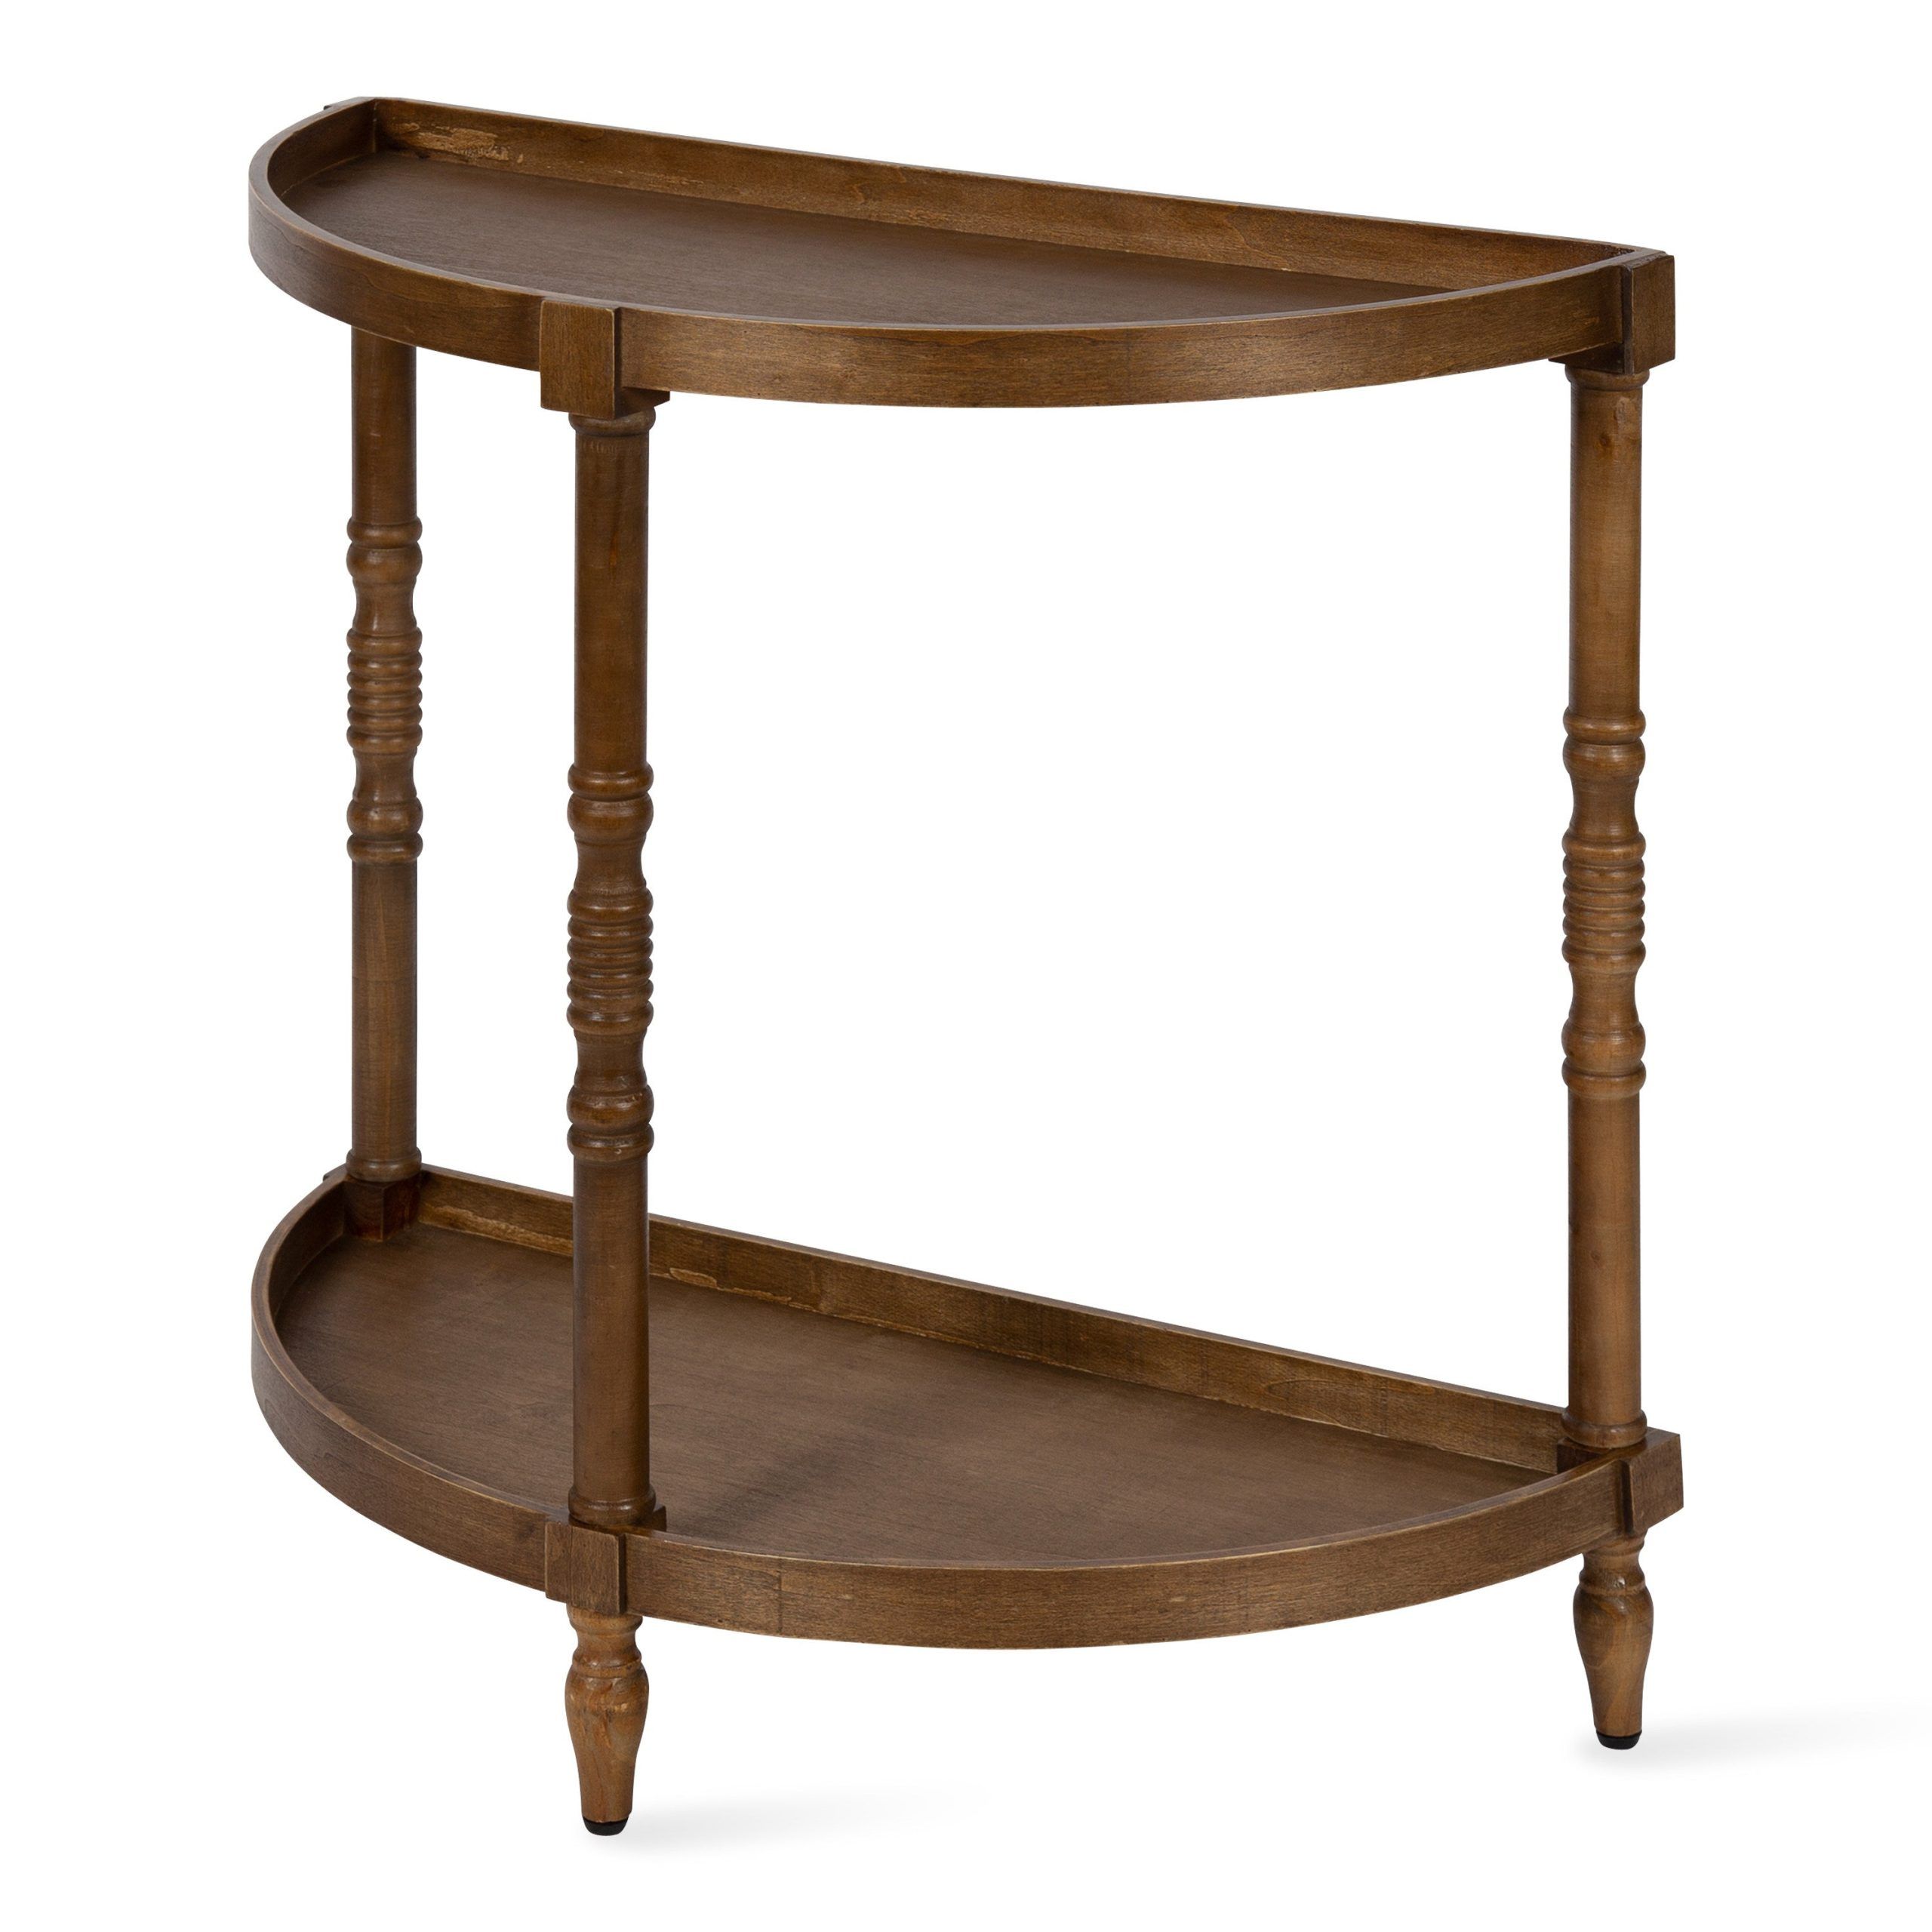 Kate And Laurel Bellport Farmhouse Demilune Console Table, 30 X 14 X 30 For Kate And Laurel Bellport Farmhouse Drink Tables (View 14 of 20)